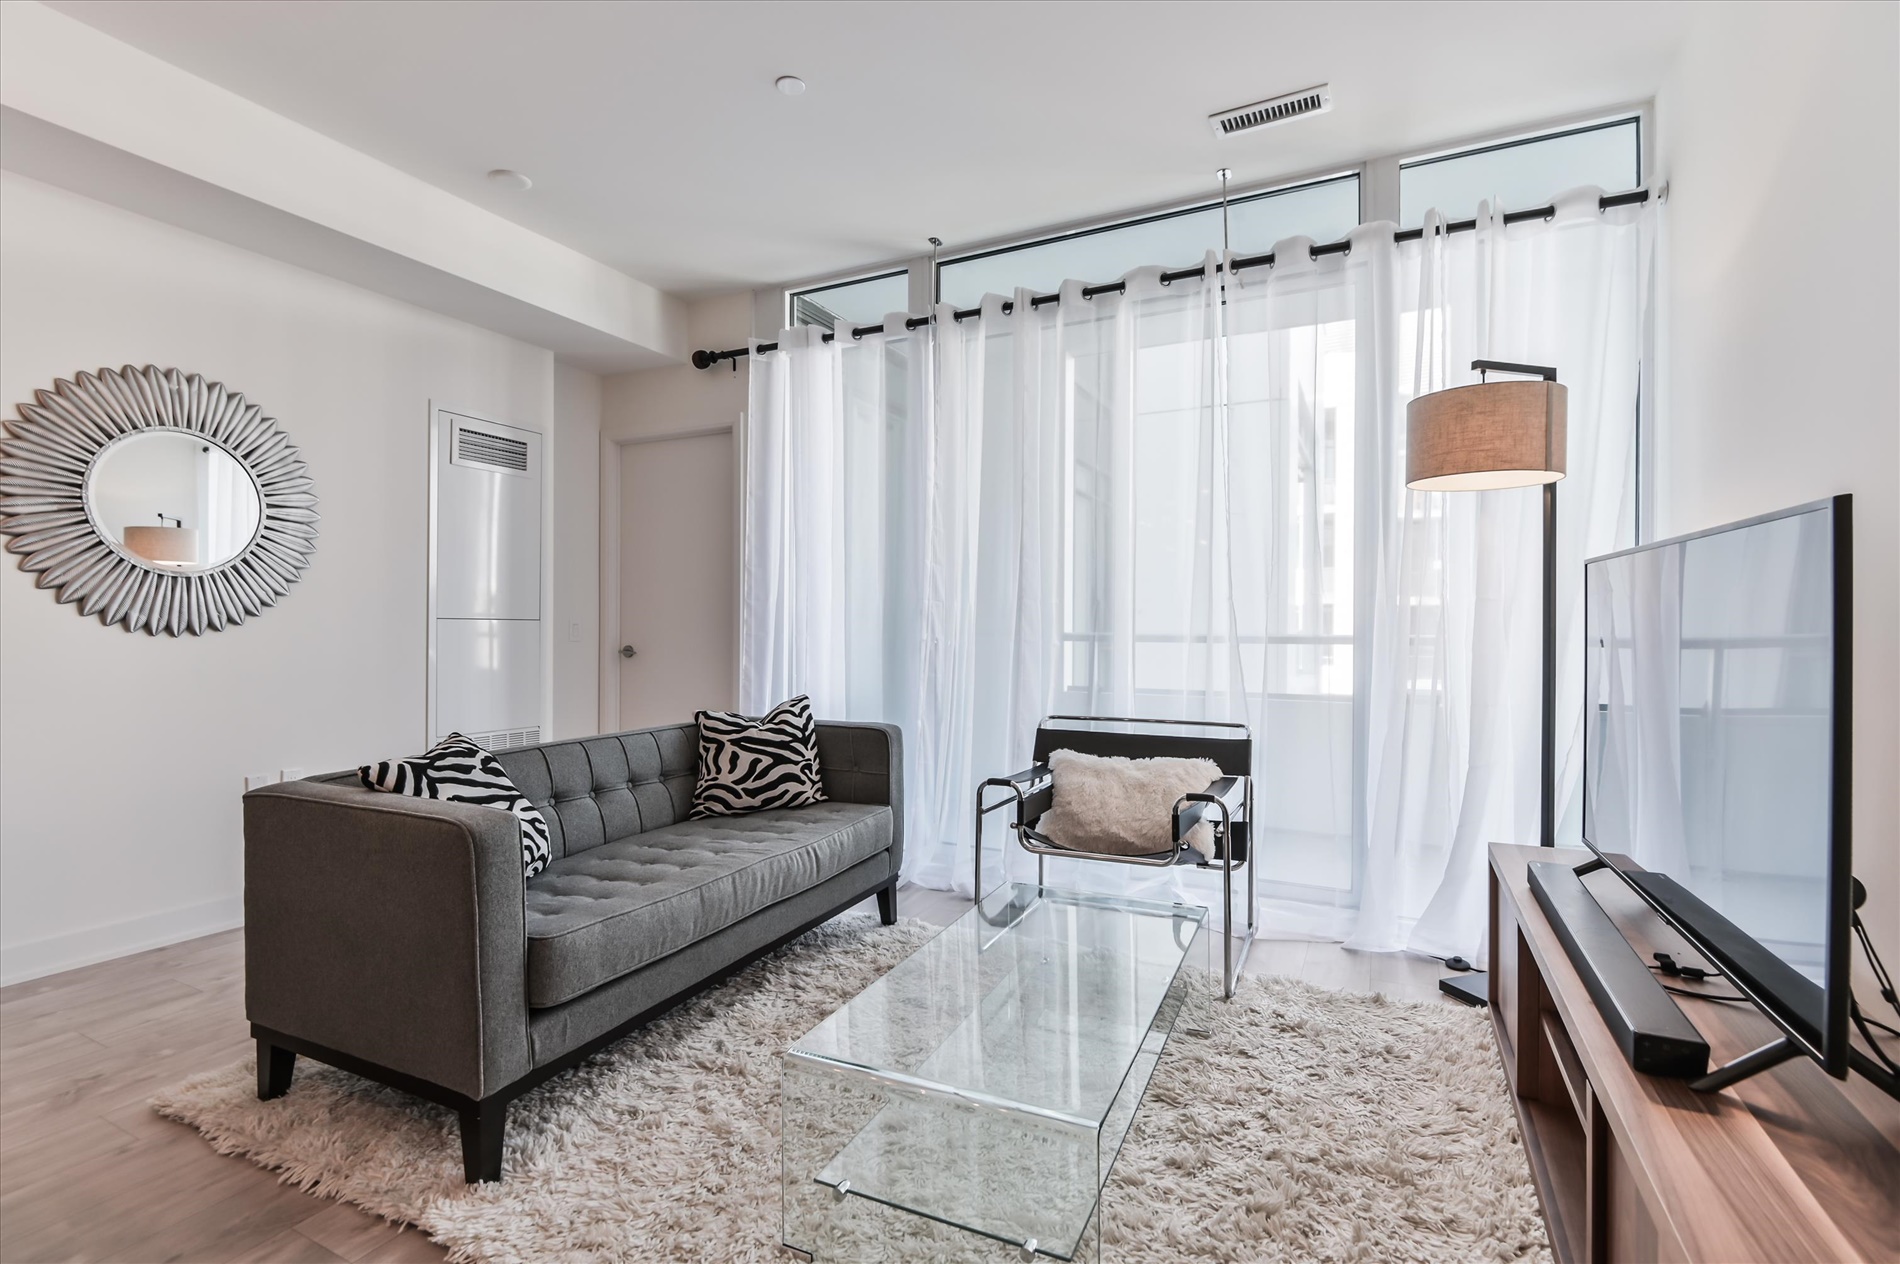 Sky-high; 2 bedroom / 2 bath Penthouse Condo in the heart of King West, Toronto